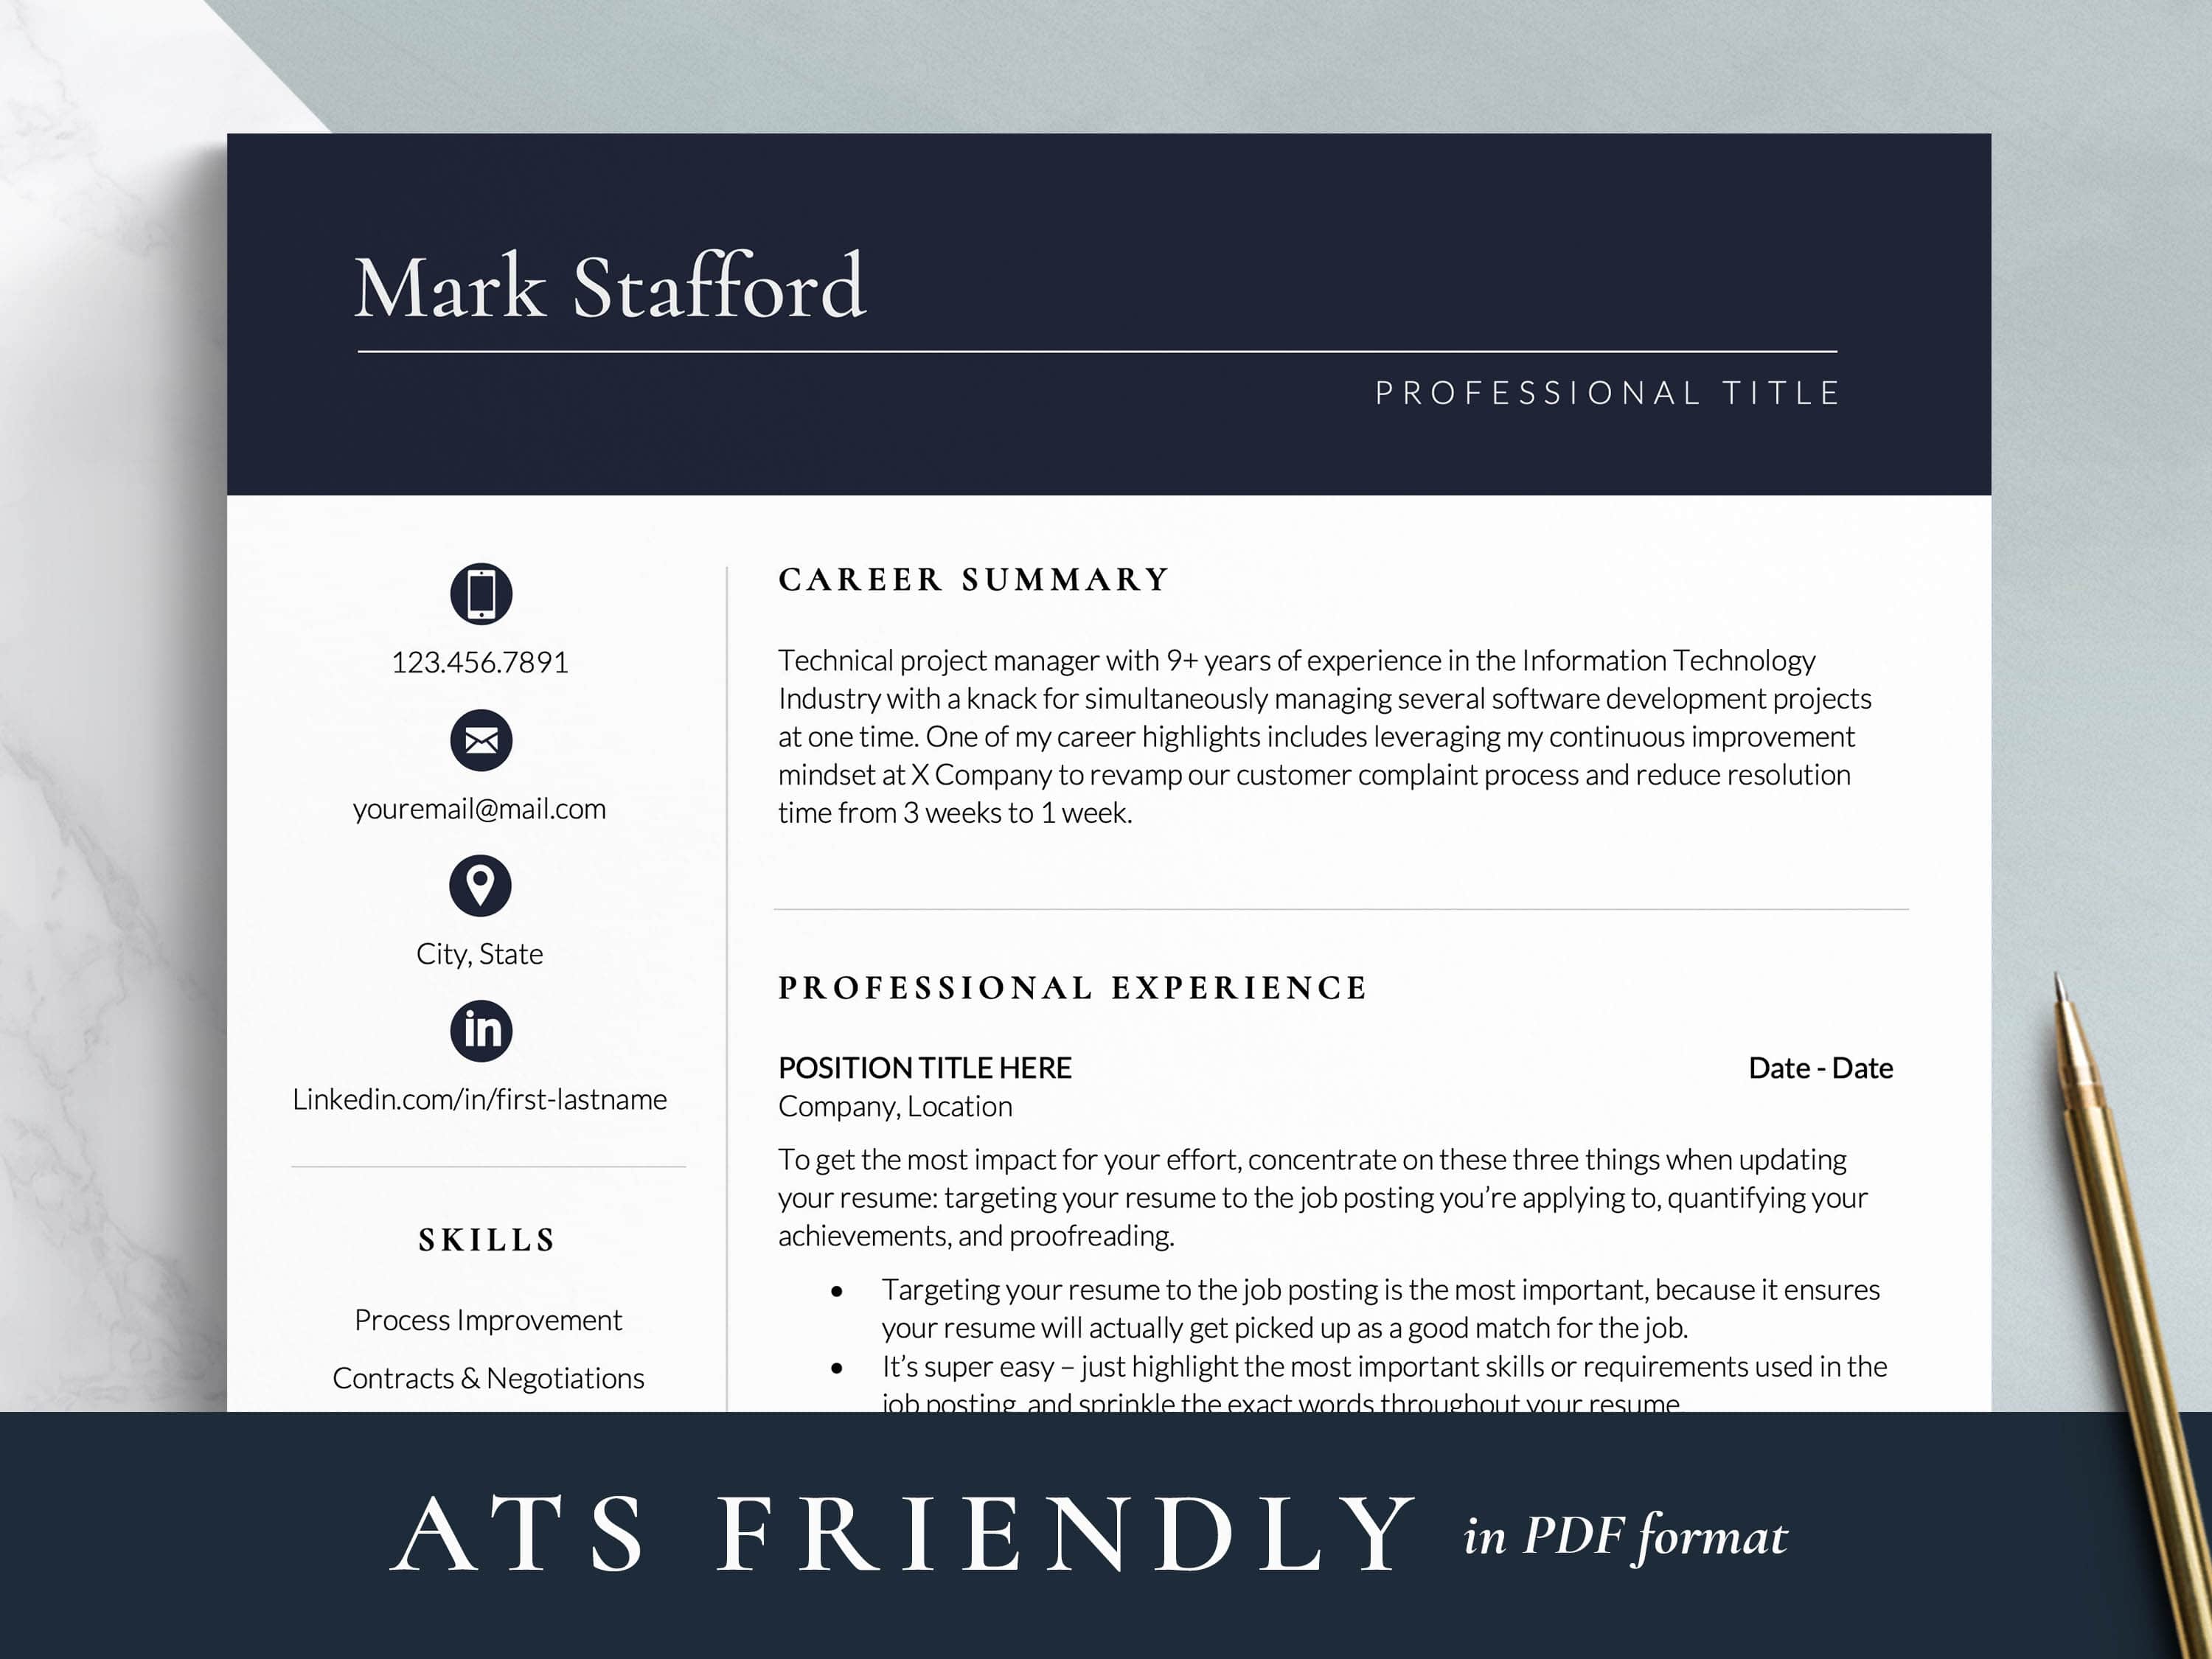 executive resume template that's ats friendly